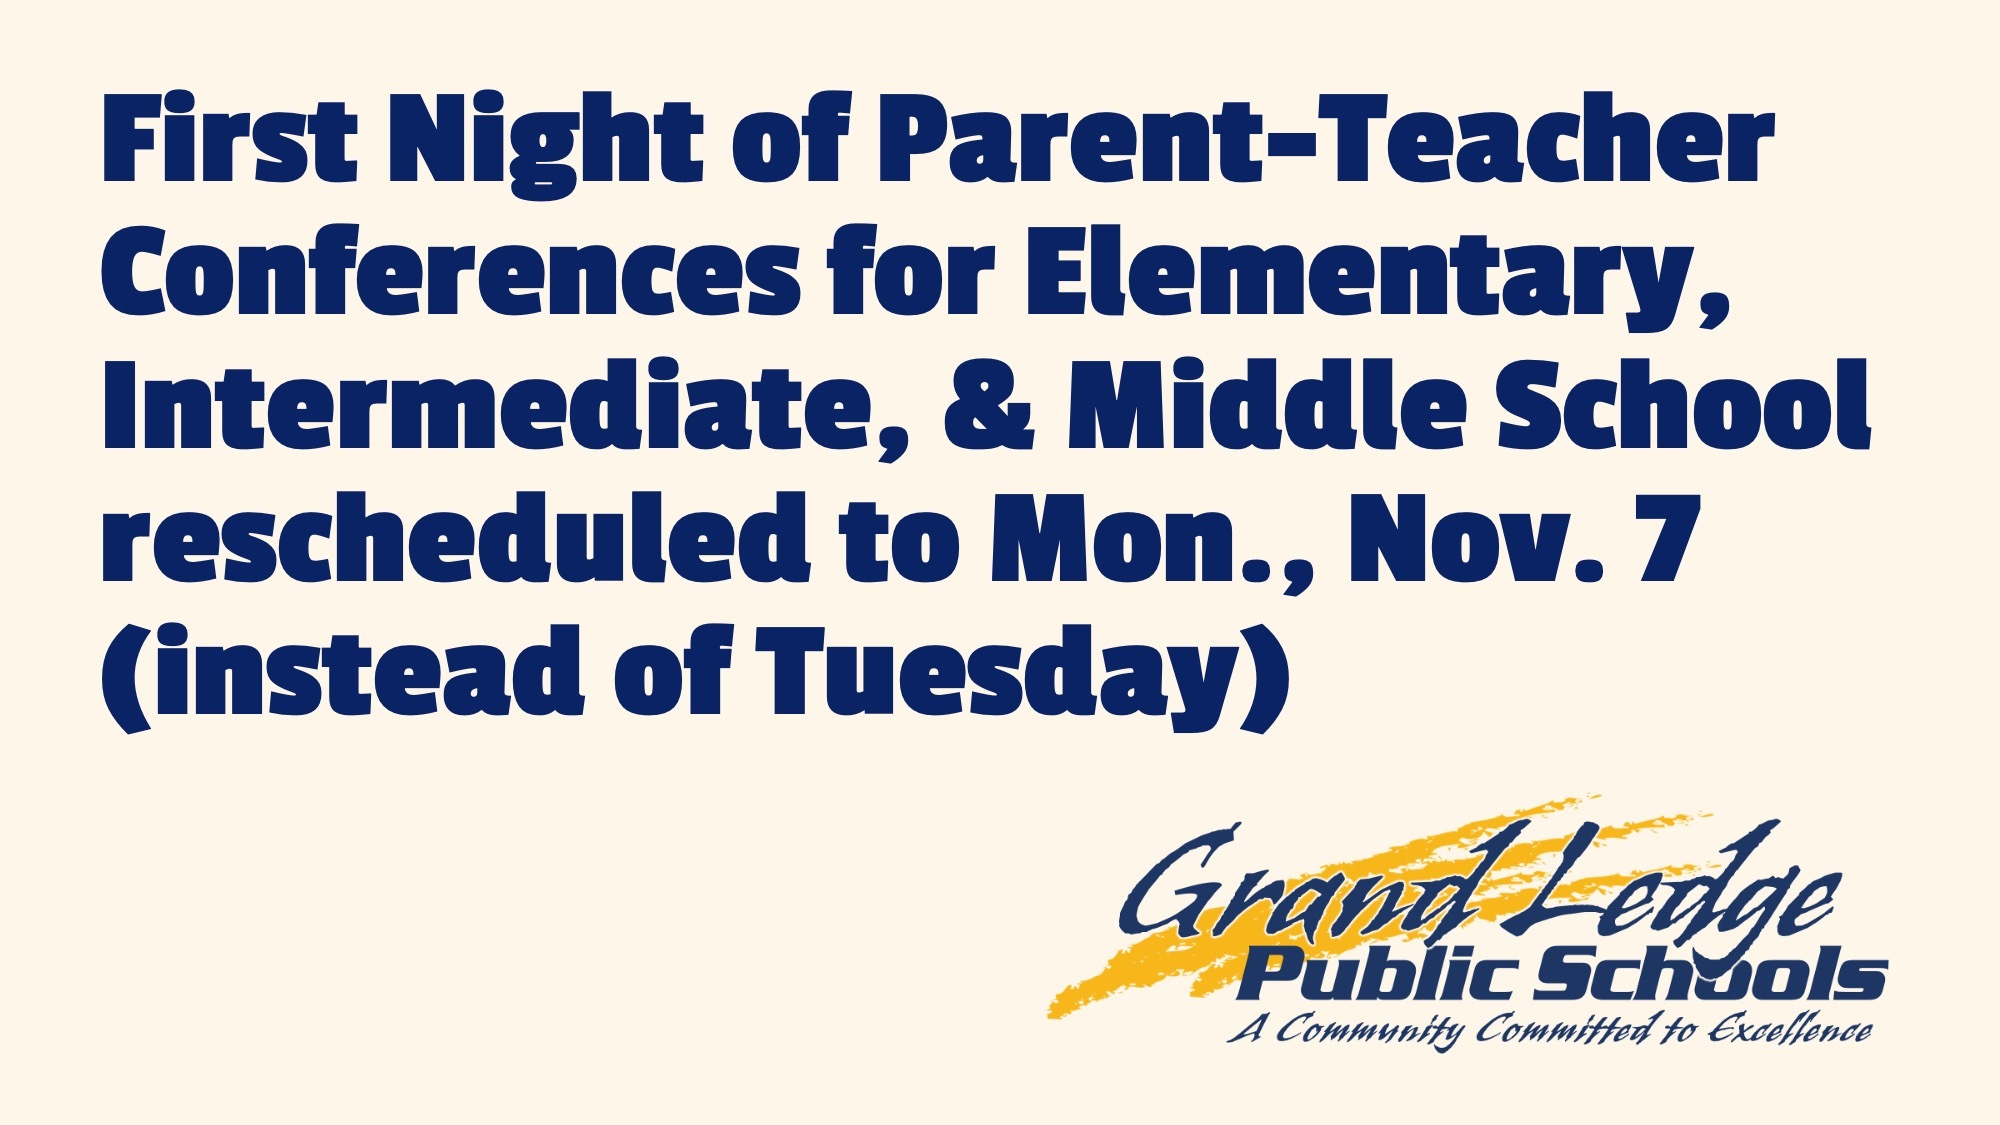 First Night of Parent-Teacher Conferences for Elementary, Intermediate, & Middle School rescheduled to Mon., Nov. 7 (instead of Tuesday)